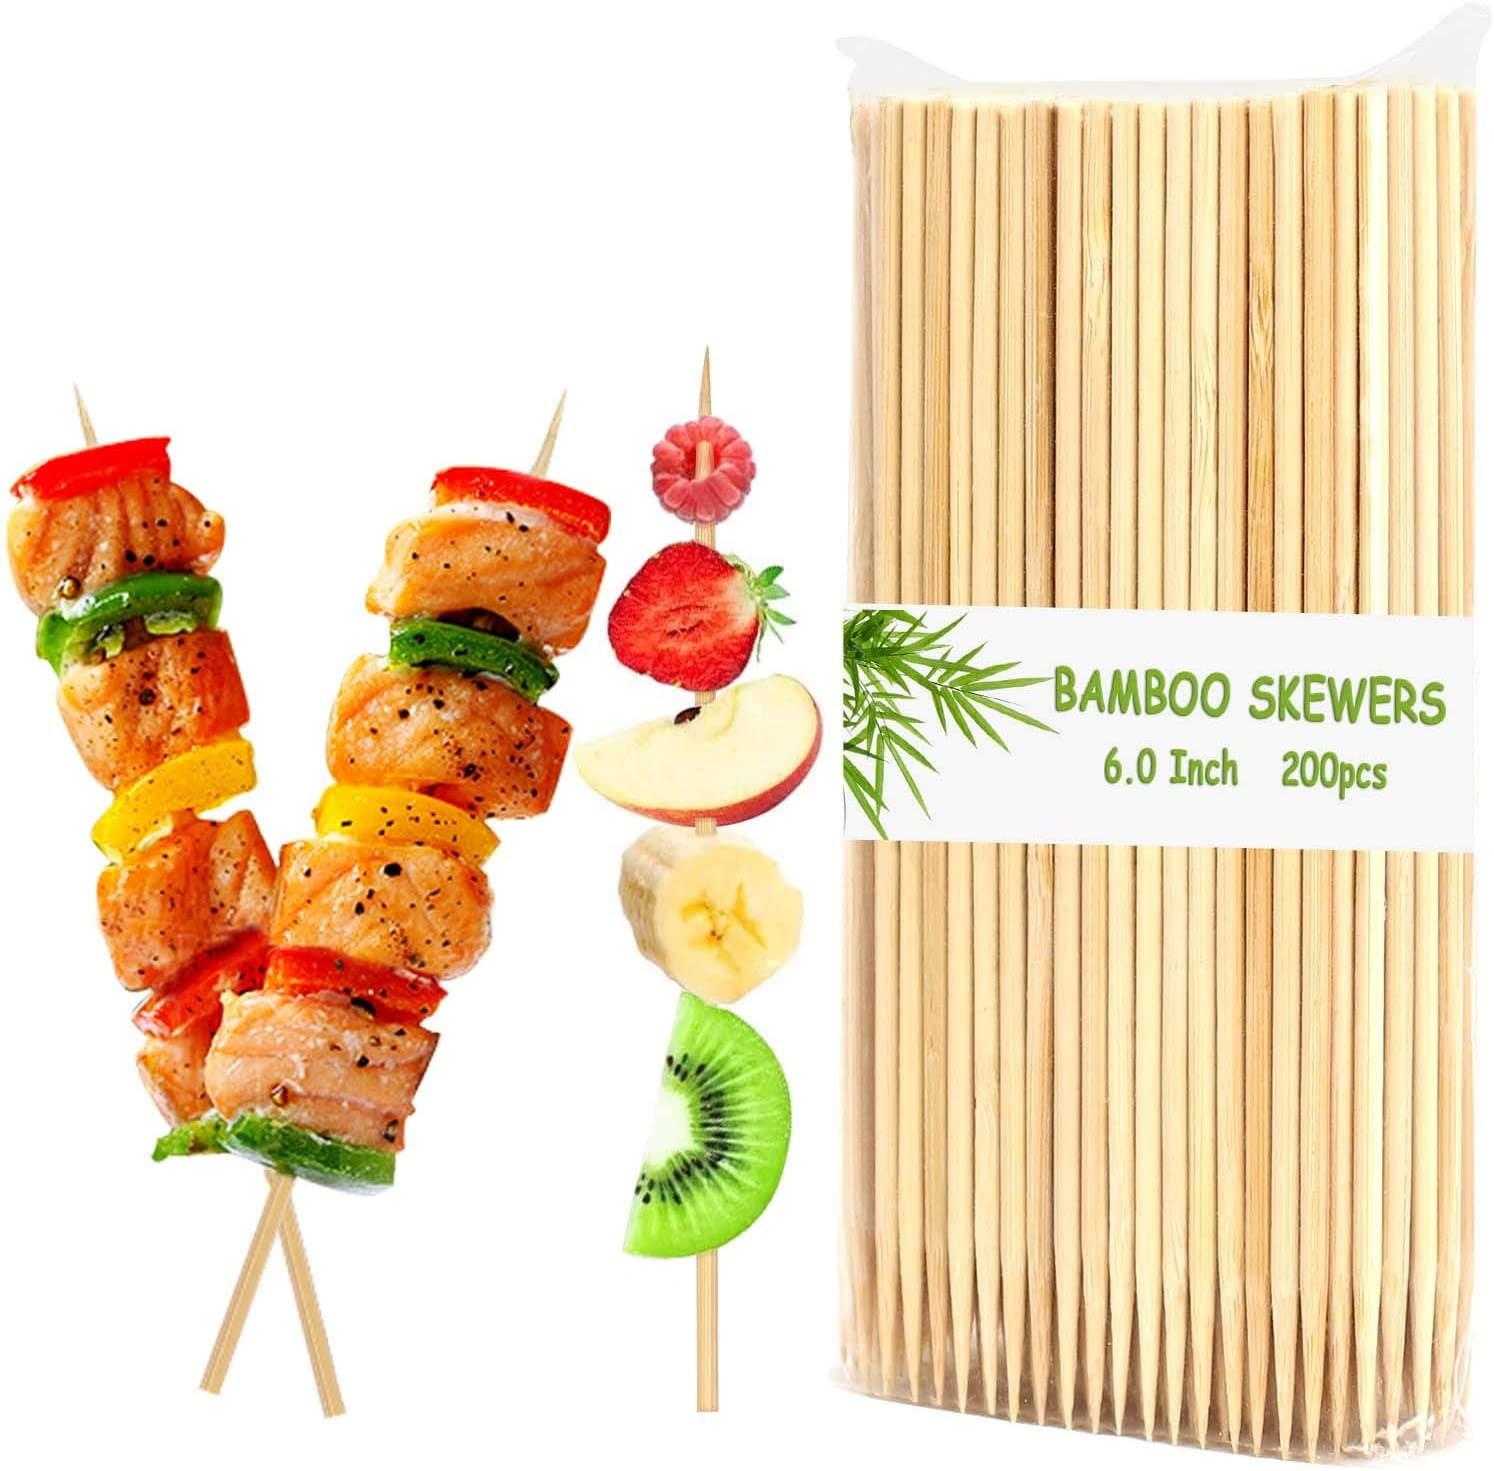 8" Wooden Bamboo BBQ Skewers for Grilling Shish Kebab Appetizers Fruit 100 PK 